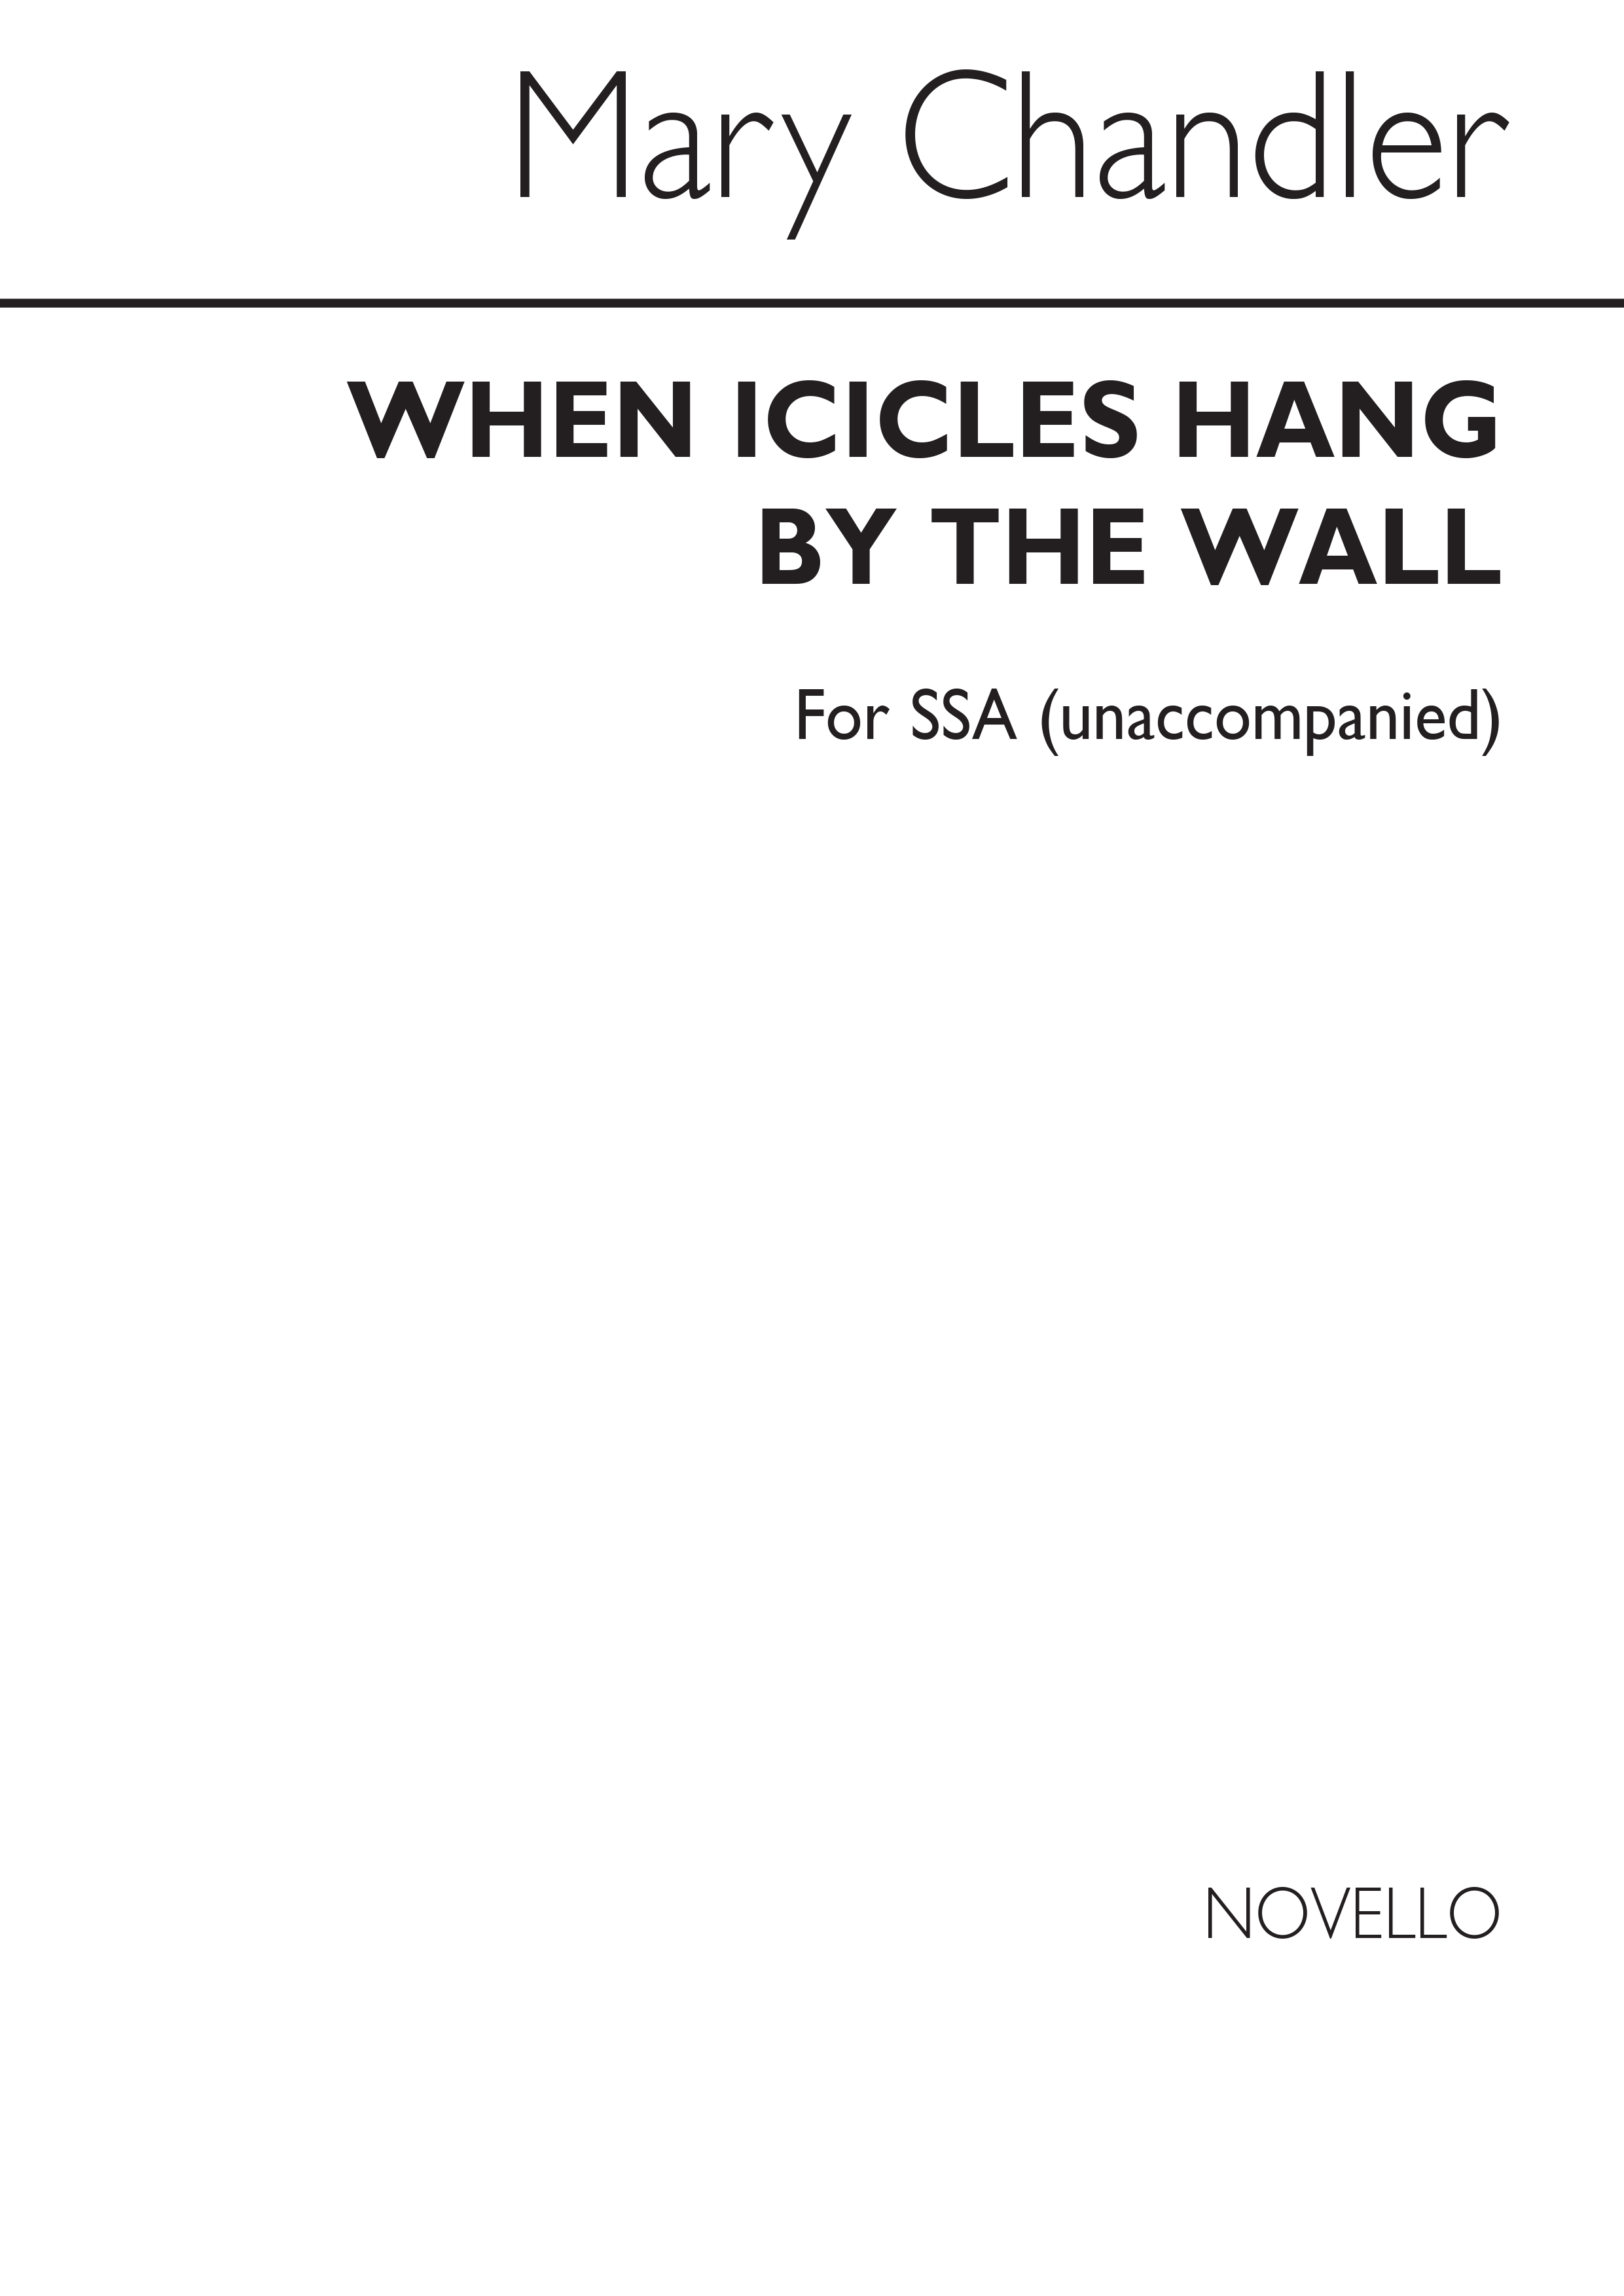 Shakespeare Mary Chandler: When Icicles Hang By The Wall